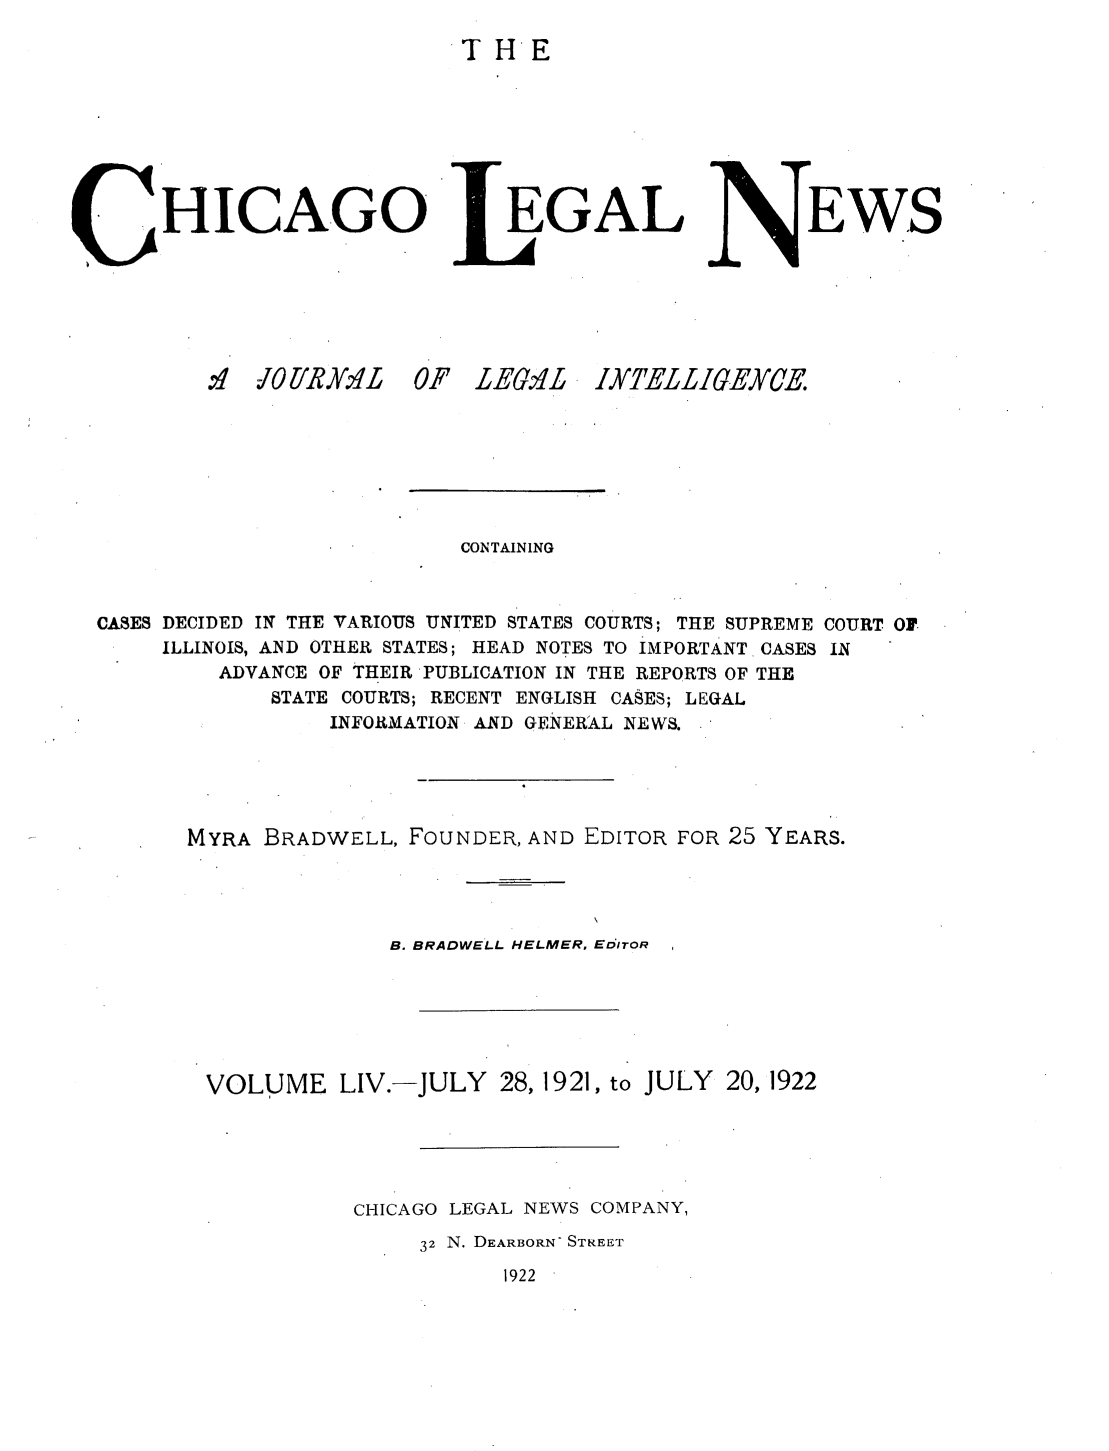 handle is hein.journals/chiclene54 and id is 1 raw text is: THEHICA.GO.4'  iOP'/R.K2L  0EGALF LE6,4LEWSCONTAININGCASES DECIDED IN THE VARIOUS UNITED STATES COURTS; THE SUPREME COURT OFILLINOIS, AND OTHER STATES; HEAD NOTES TO IMPORTANT CASES INADVANCE OF THEIR PUBLICATION IN THE REPORTS OF THESTATE COURTS; RECENT ENGLISH CASES; LEGALINFORMATION AND GENERAL NEWS.MYRA BRADWELL, FOUNDER, AND EDITOR FOR 25 YEARS.B. BRADWELL HELMER, EDITORVOLUME LIV.-JULY 28, 1921, to JULY 20, 1922CHICAGO LEGAL NEWS COMPANY,32 N. DEARBORN- STREET1922IYTELLIGEYCE